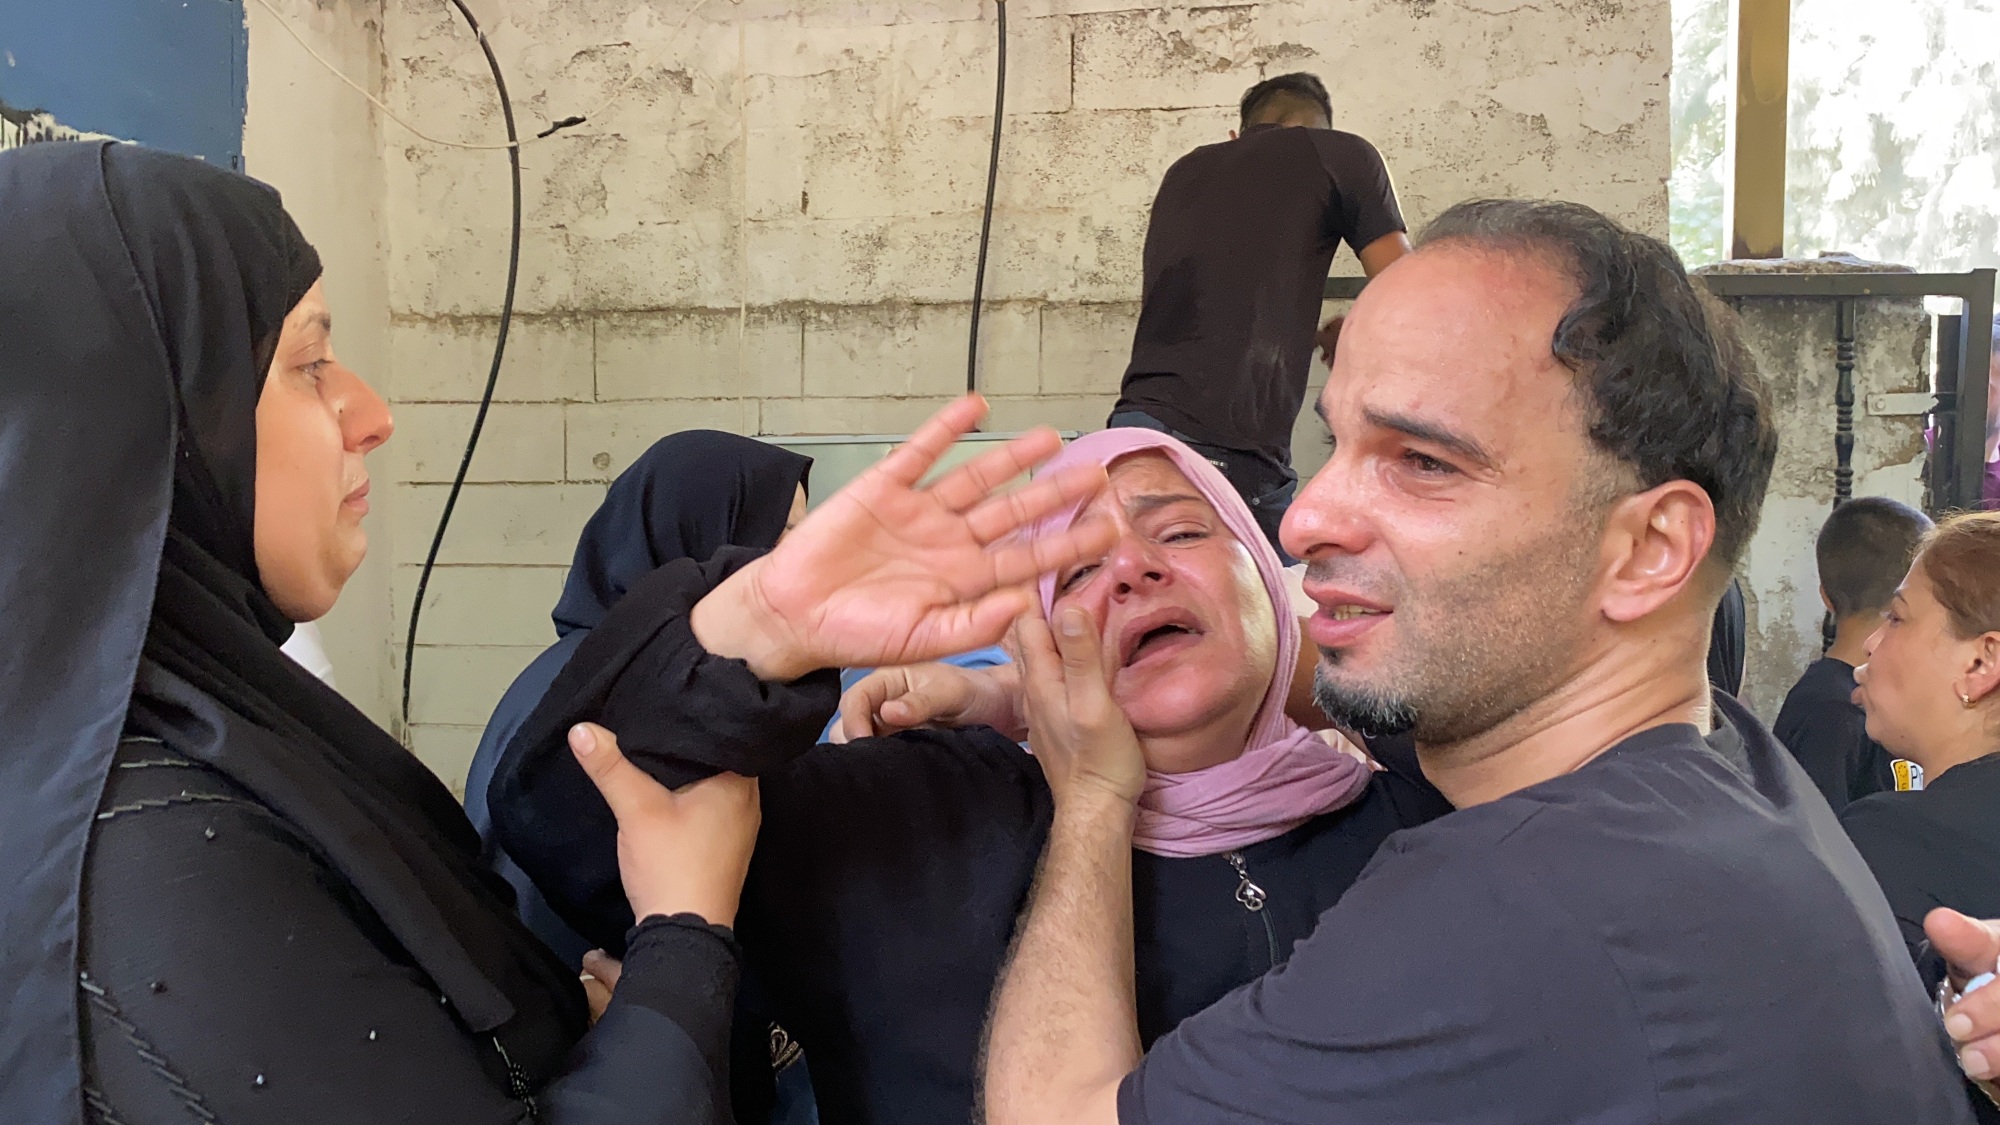 Relatives mourn during the funeral of Raed Abu Saif, 21, and Saleh Omar, 19, in Jenin refugee camp in the northern occupied West Bank on 16 August 2021 (MEE/Shatha Hanaysha)